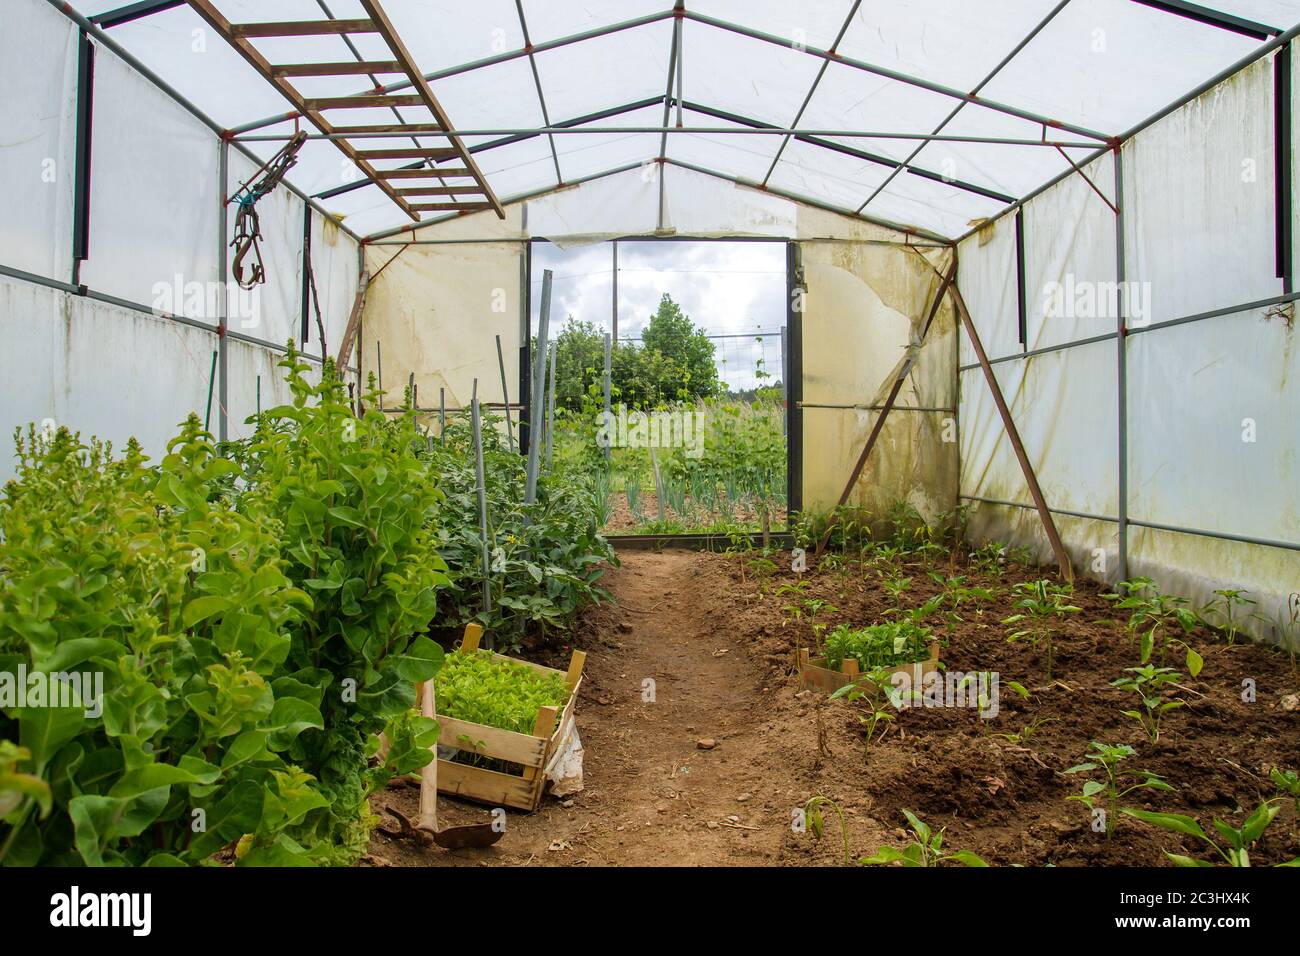 Growing organic food in a greenhouse Stock Photo